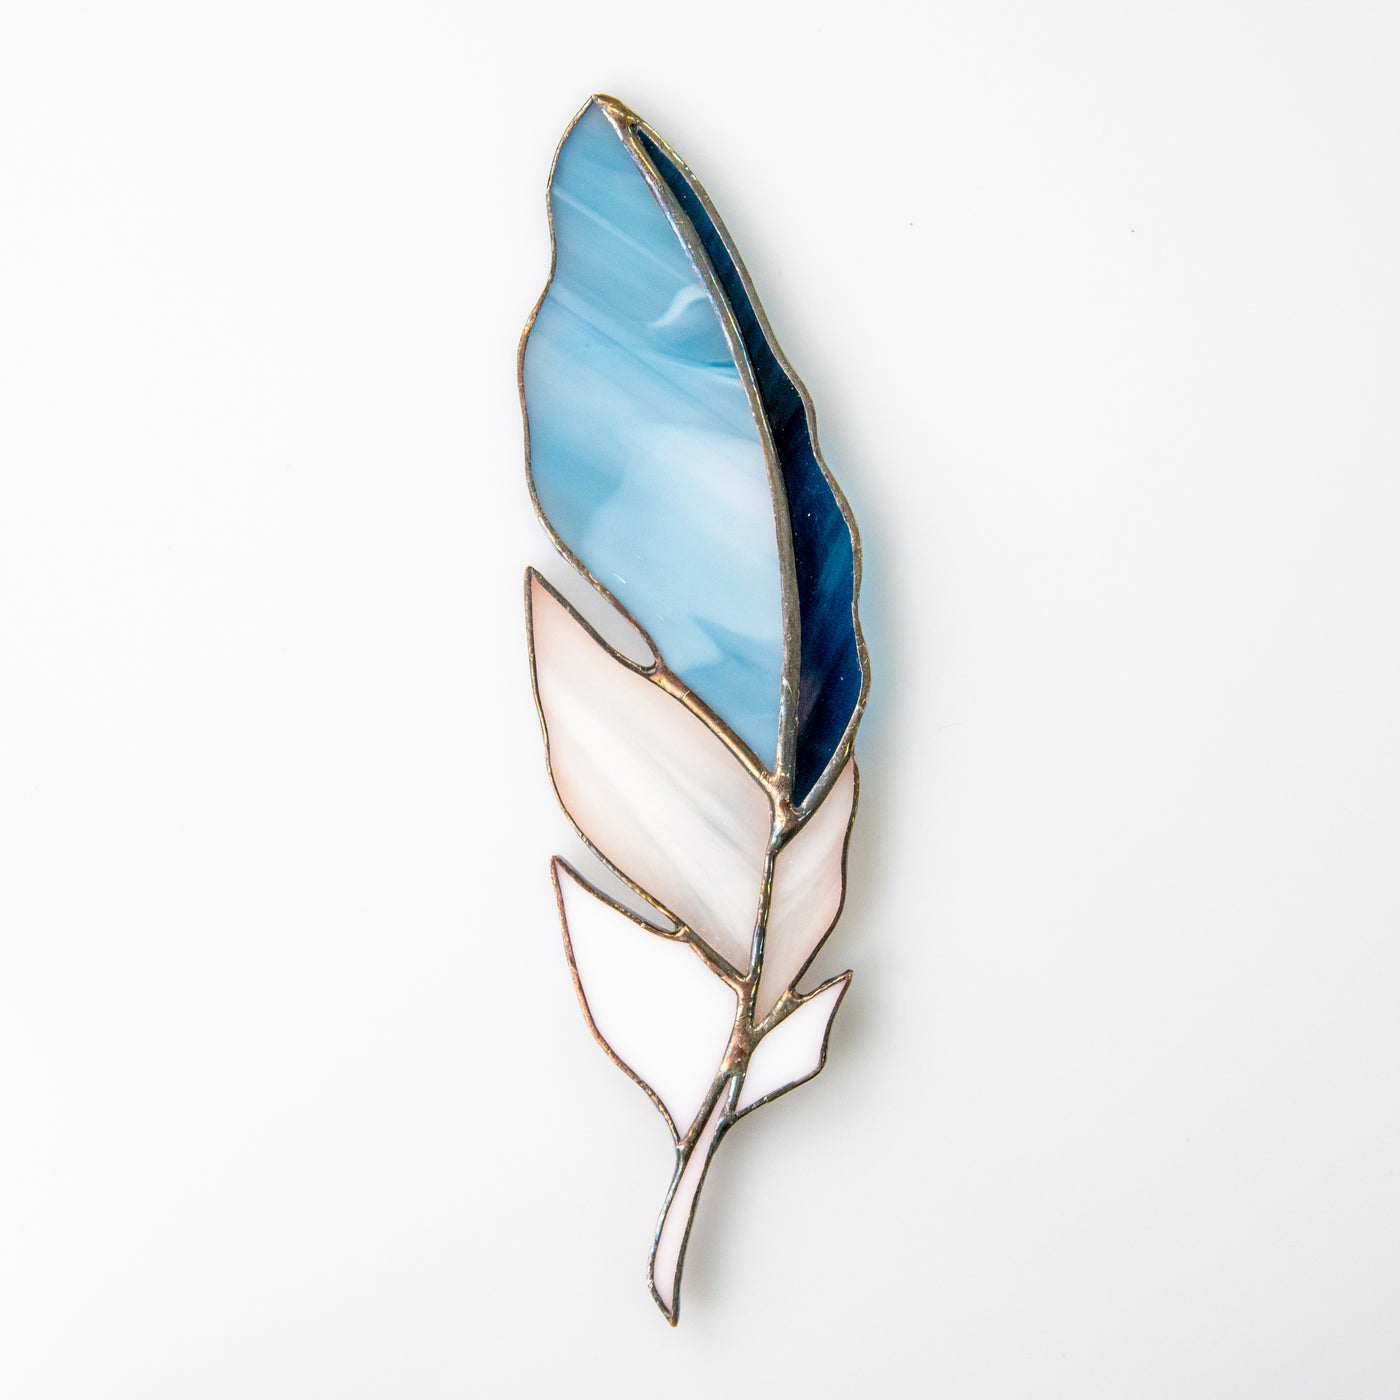 Suncatcher of a stained glass sky-blue  with white and navy colours feather